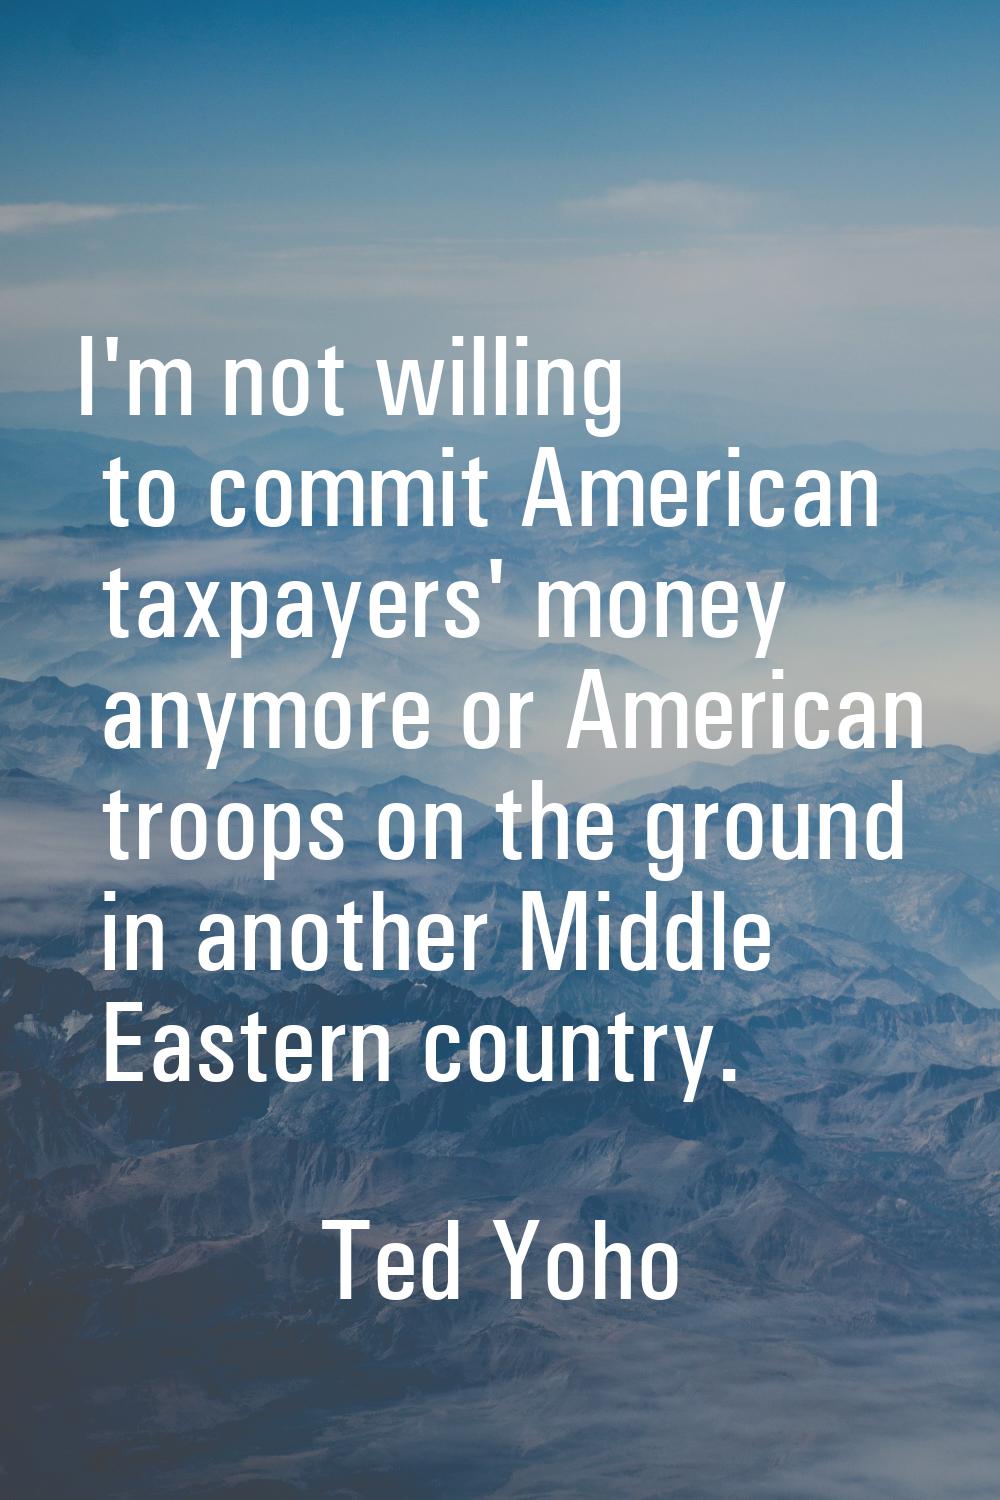 I'm not willing to commit American taxpayers' money anymore or American troops on the ground in ano